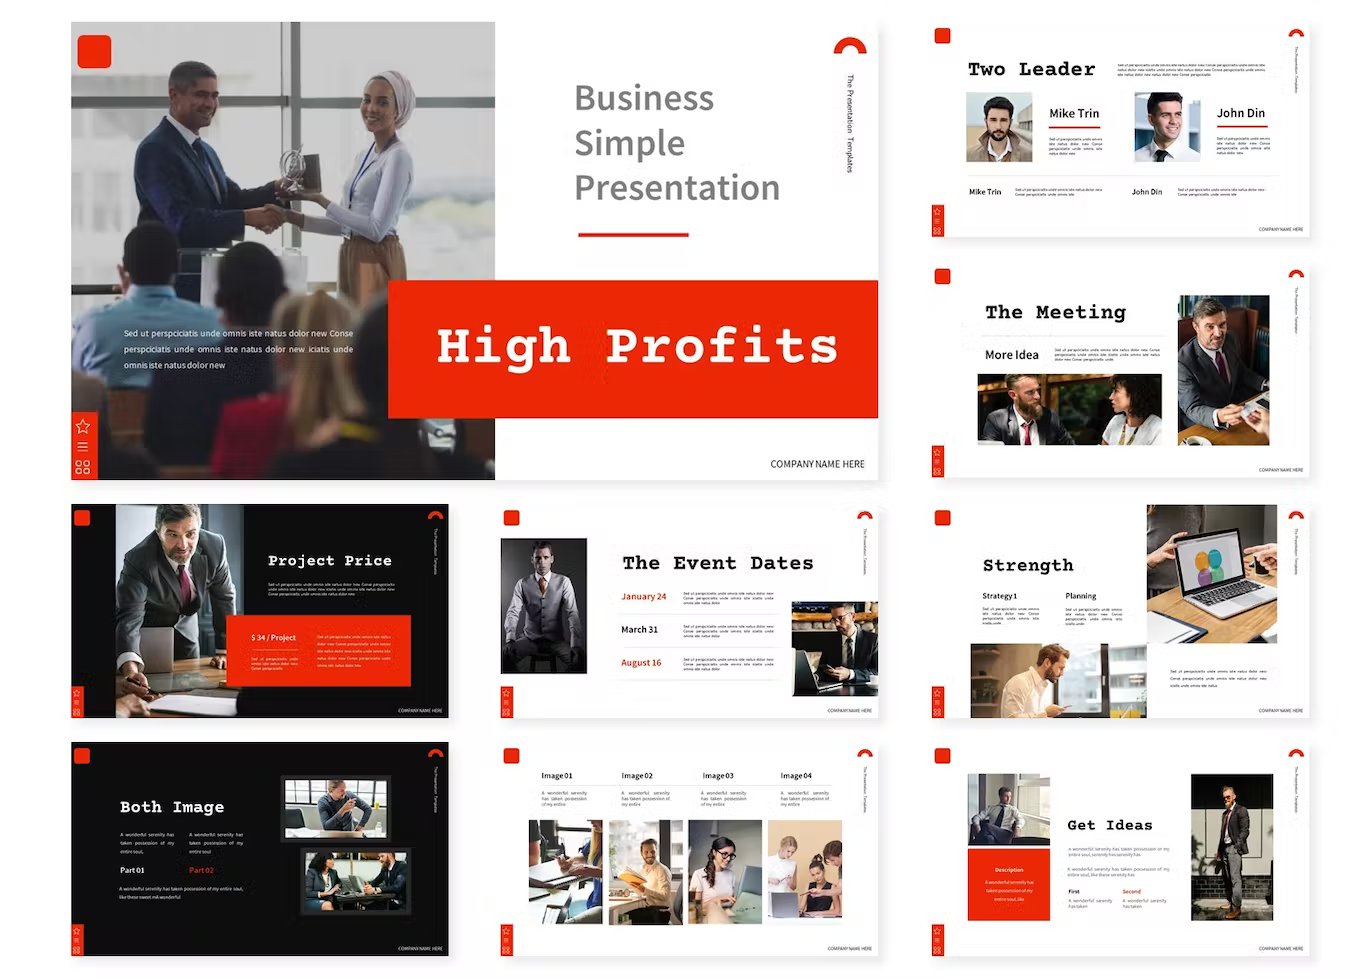 A set of 9 different high profits powerpoint templates in black, white and red on a white background.